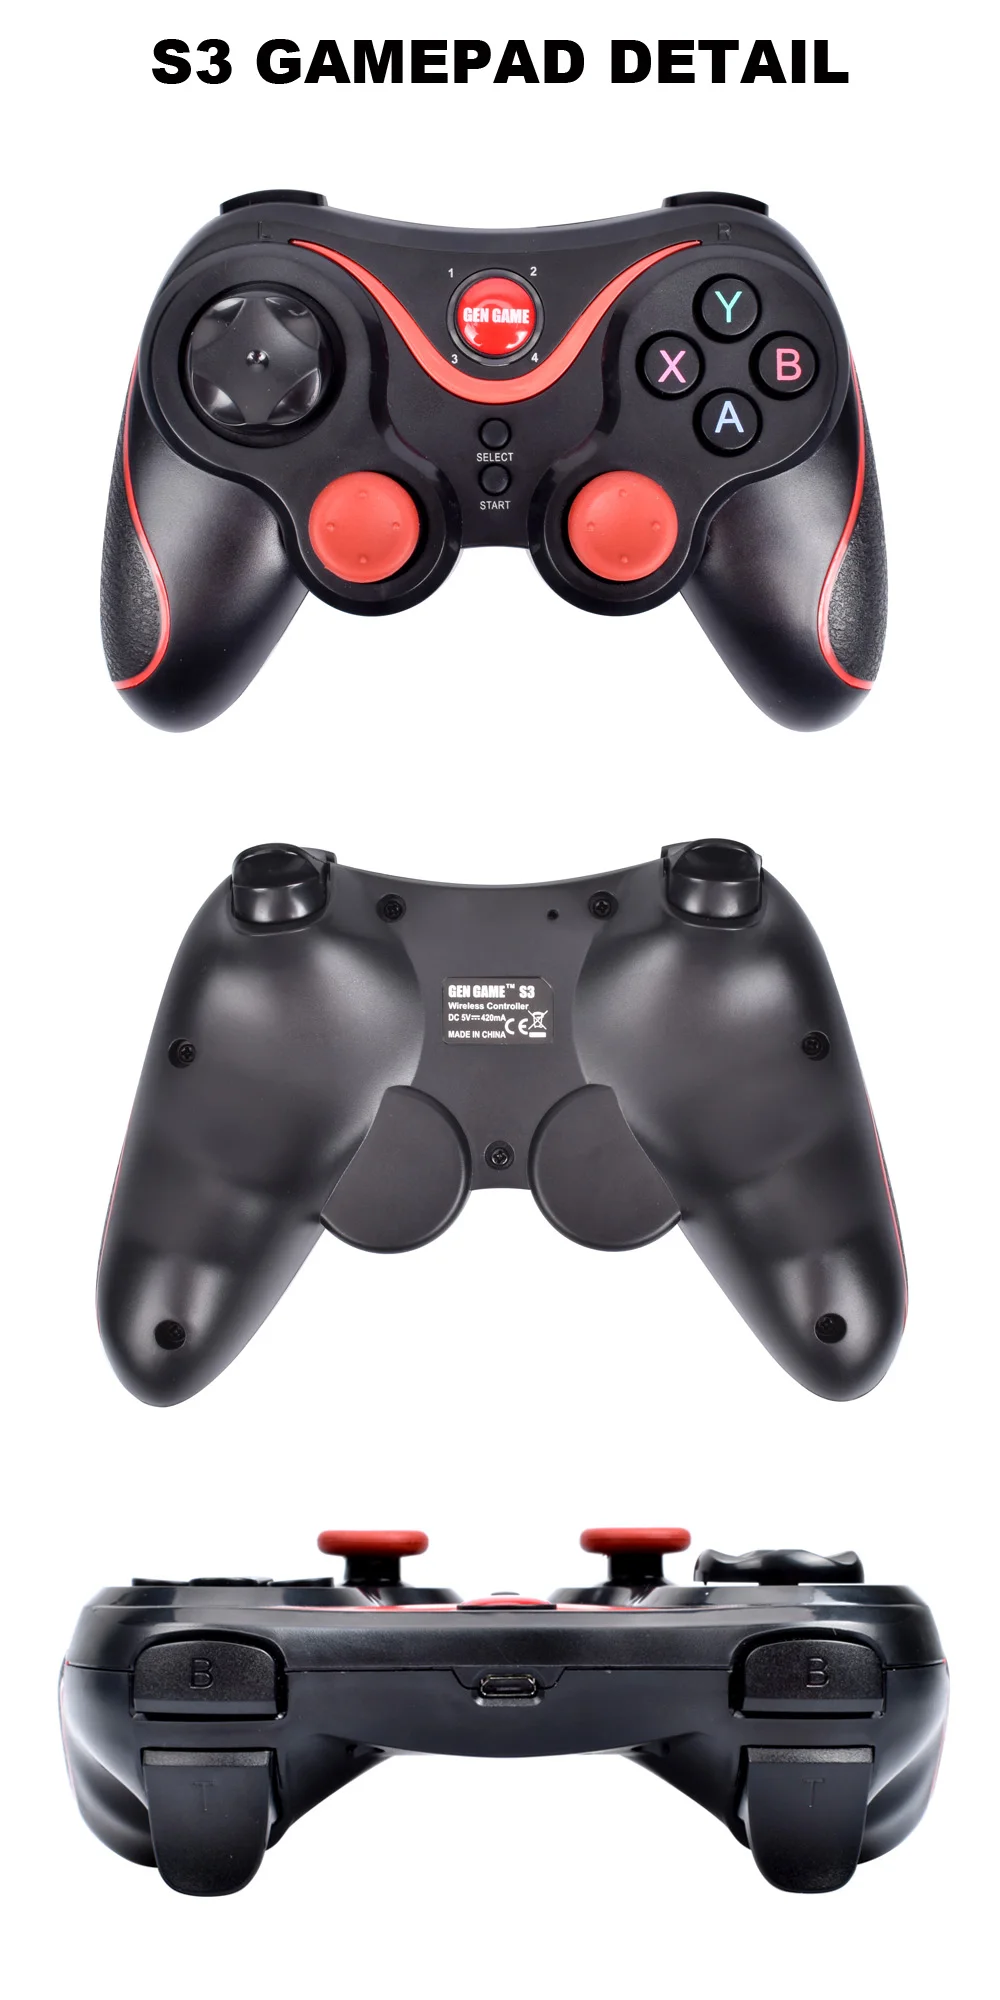 S3 Wireless Game Controller Gamepad Joystick For Android Cellphone Tablet Tv Box,Pad,Tablet - Tv Box Gamepad,Gamepad Controller For Android,Cellphone Gamepad Product on Alibaba.com